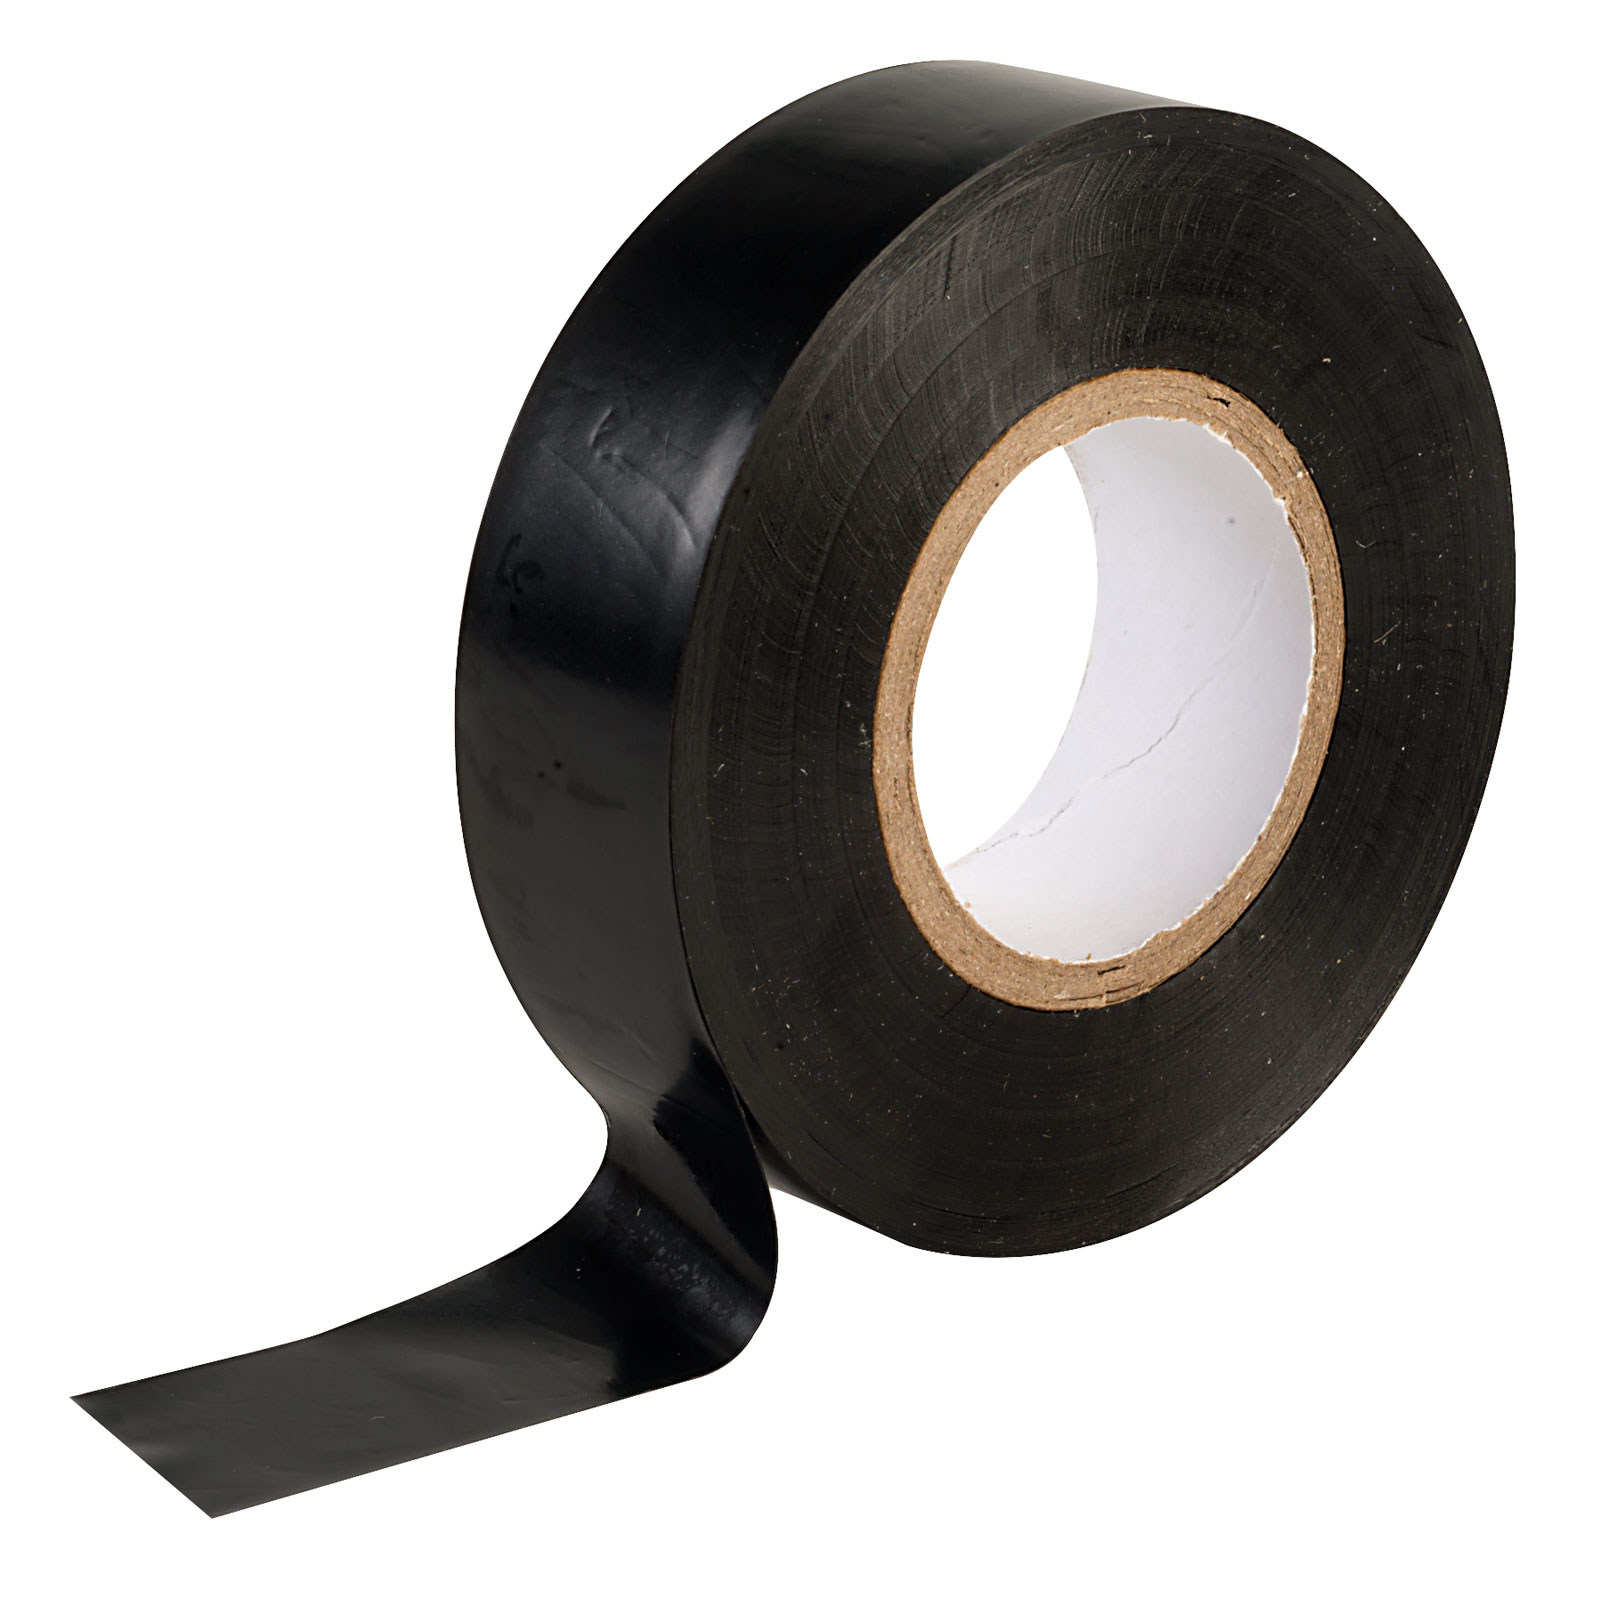 Insulating Tape Testing and Certification